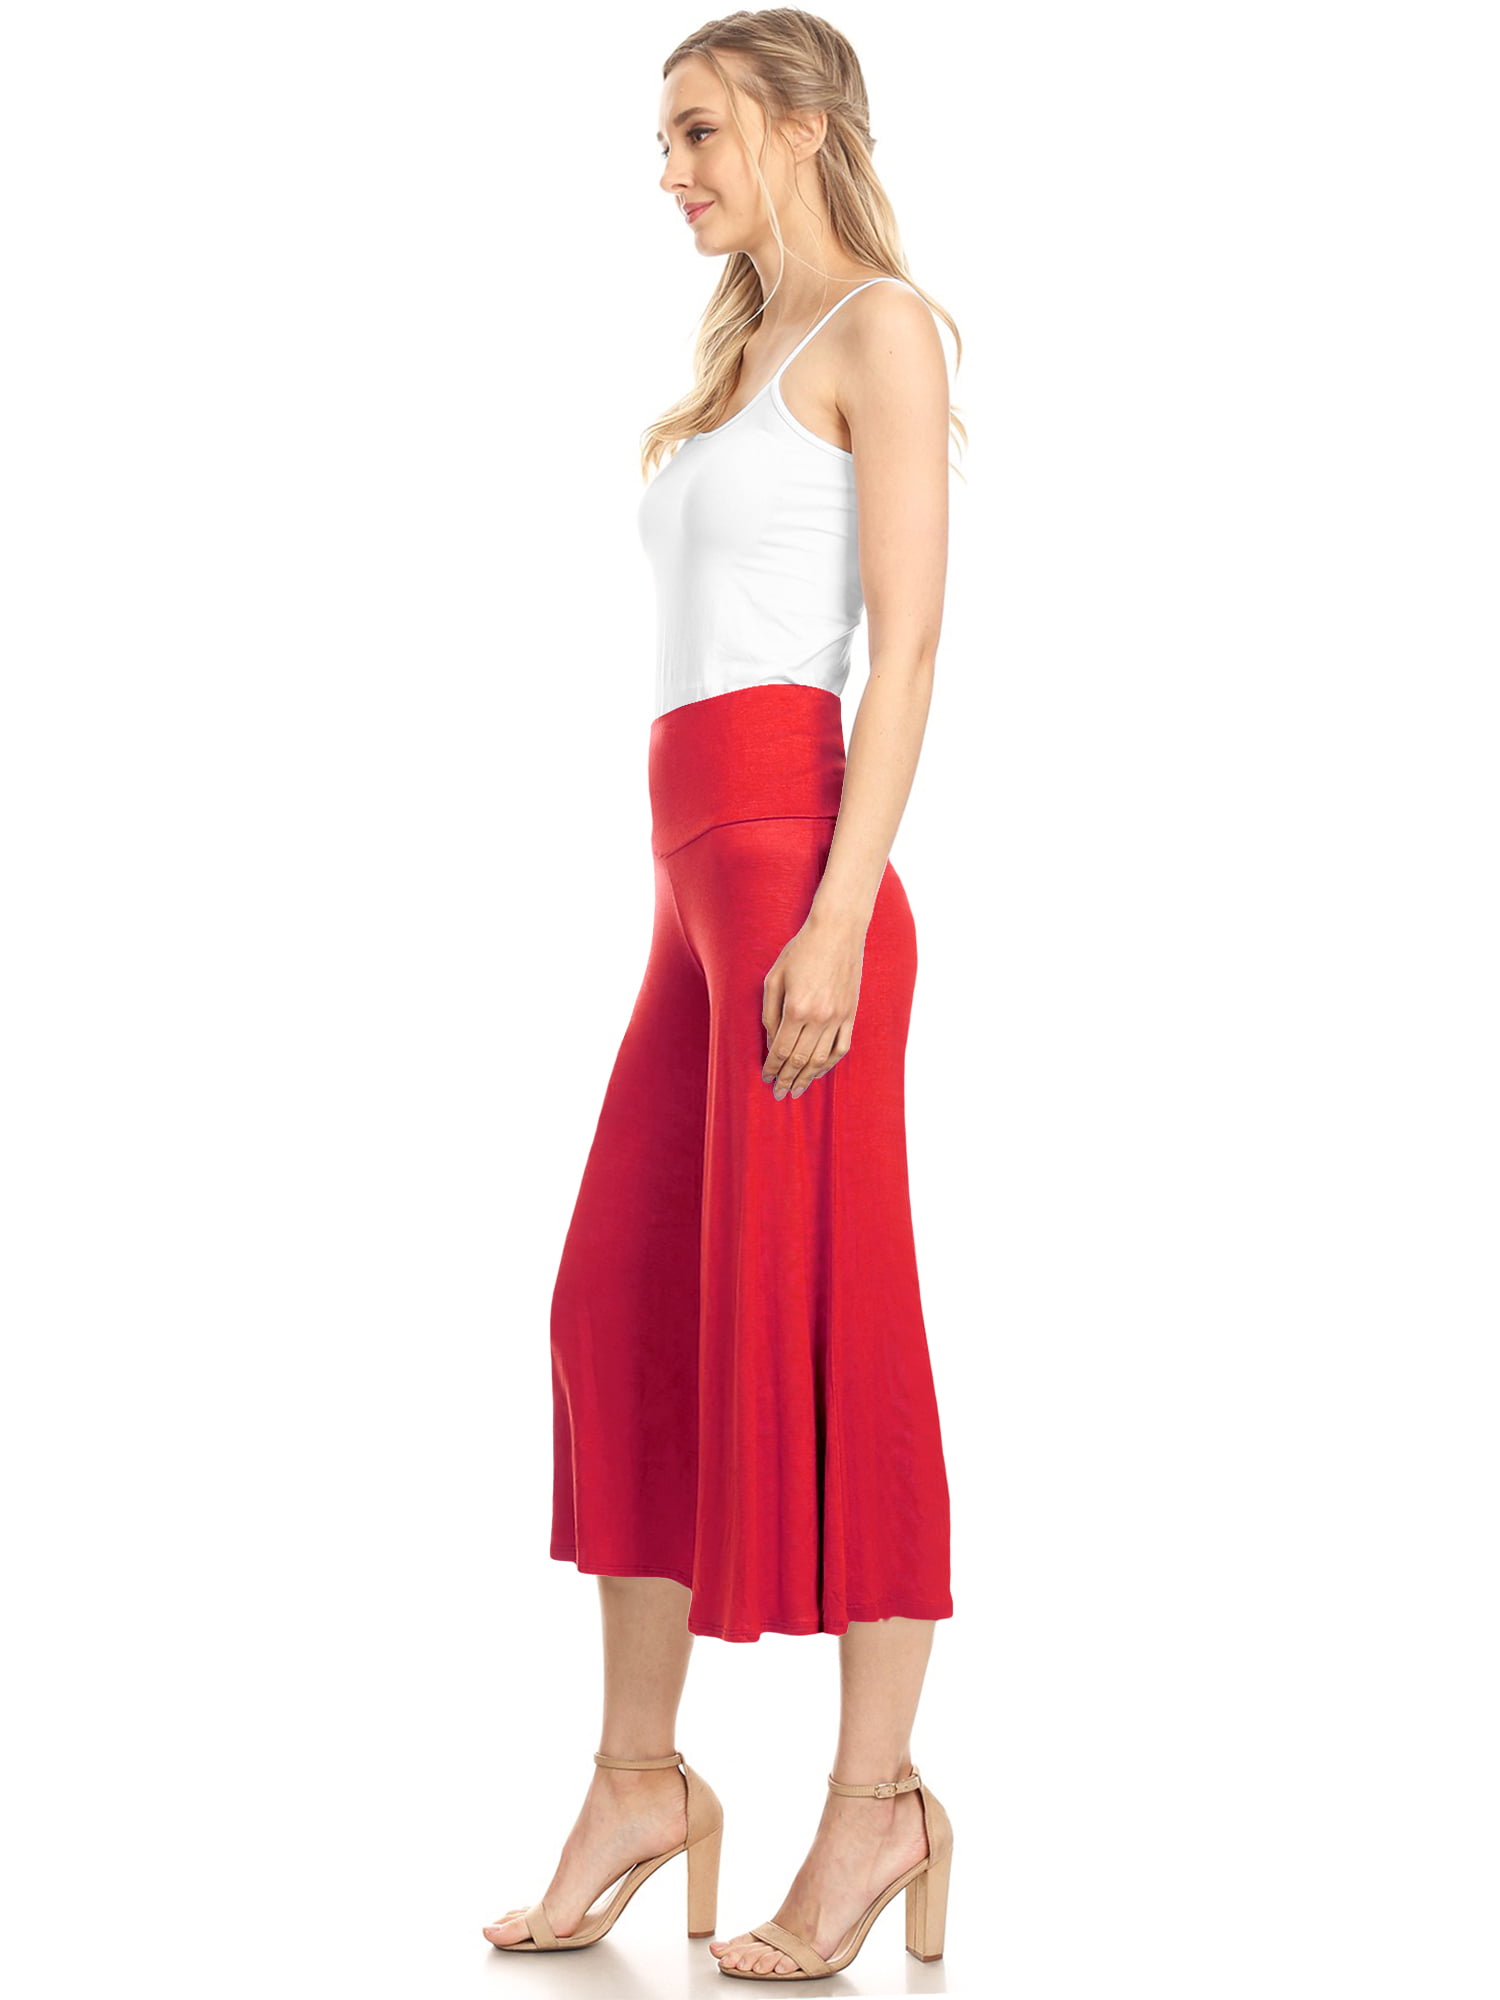 Johnny Culottes Pants Made by L Knit Women\'s RED